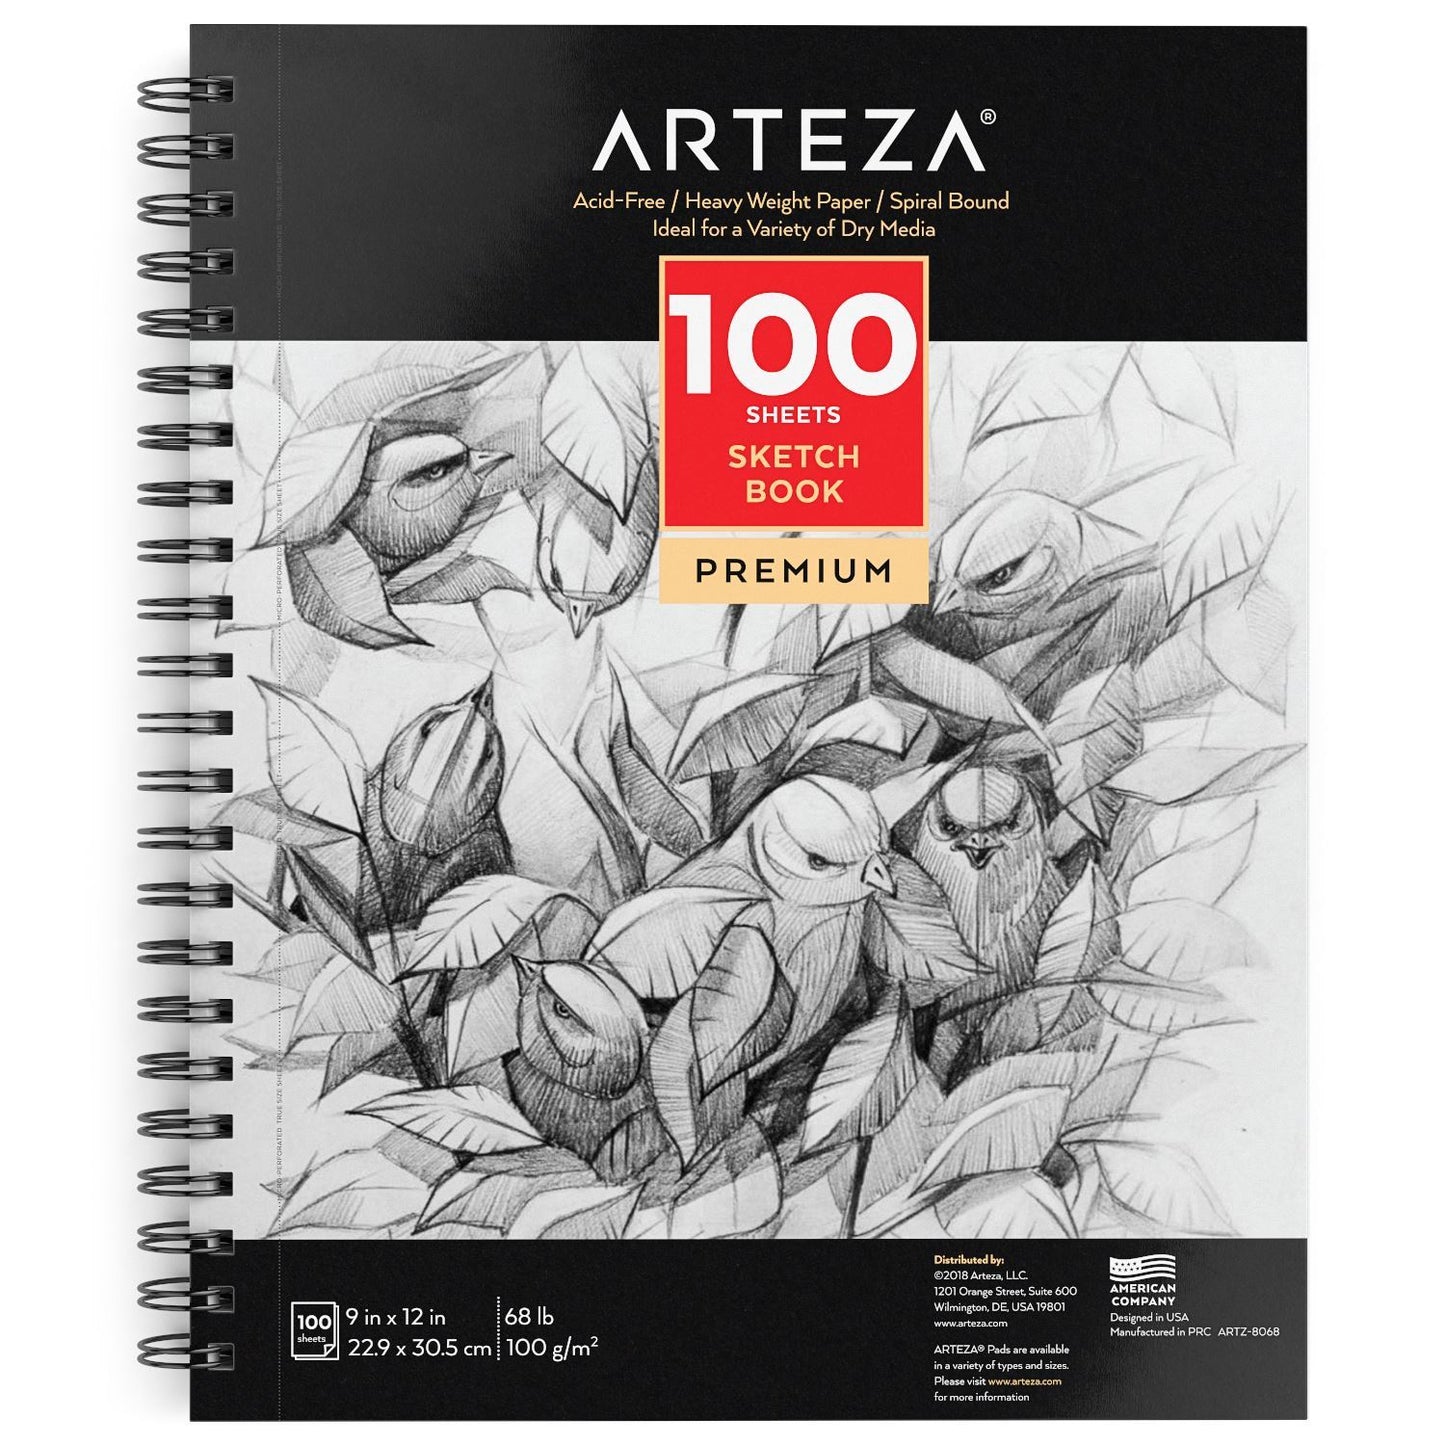 Arteza Sketchbook and Colored Pencils Review 